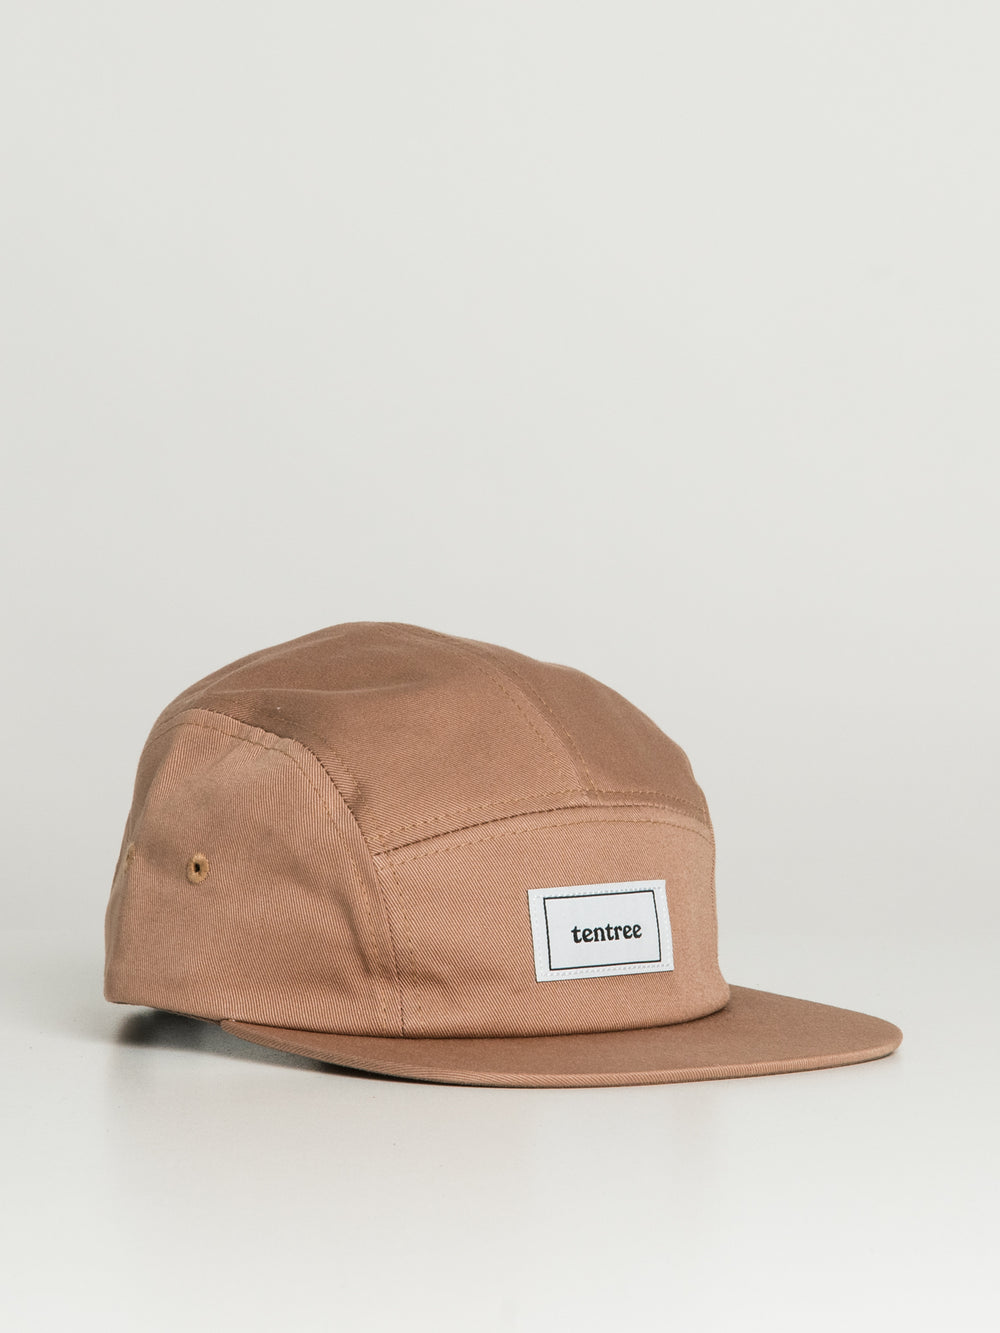 TENTREE AJUSTABLE 5 PANEL CAMPER TWILL HAT - CLEARANCE